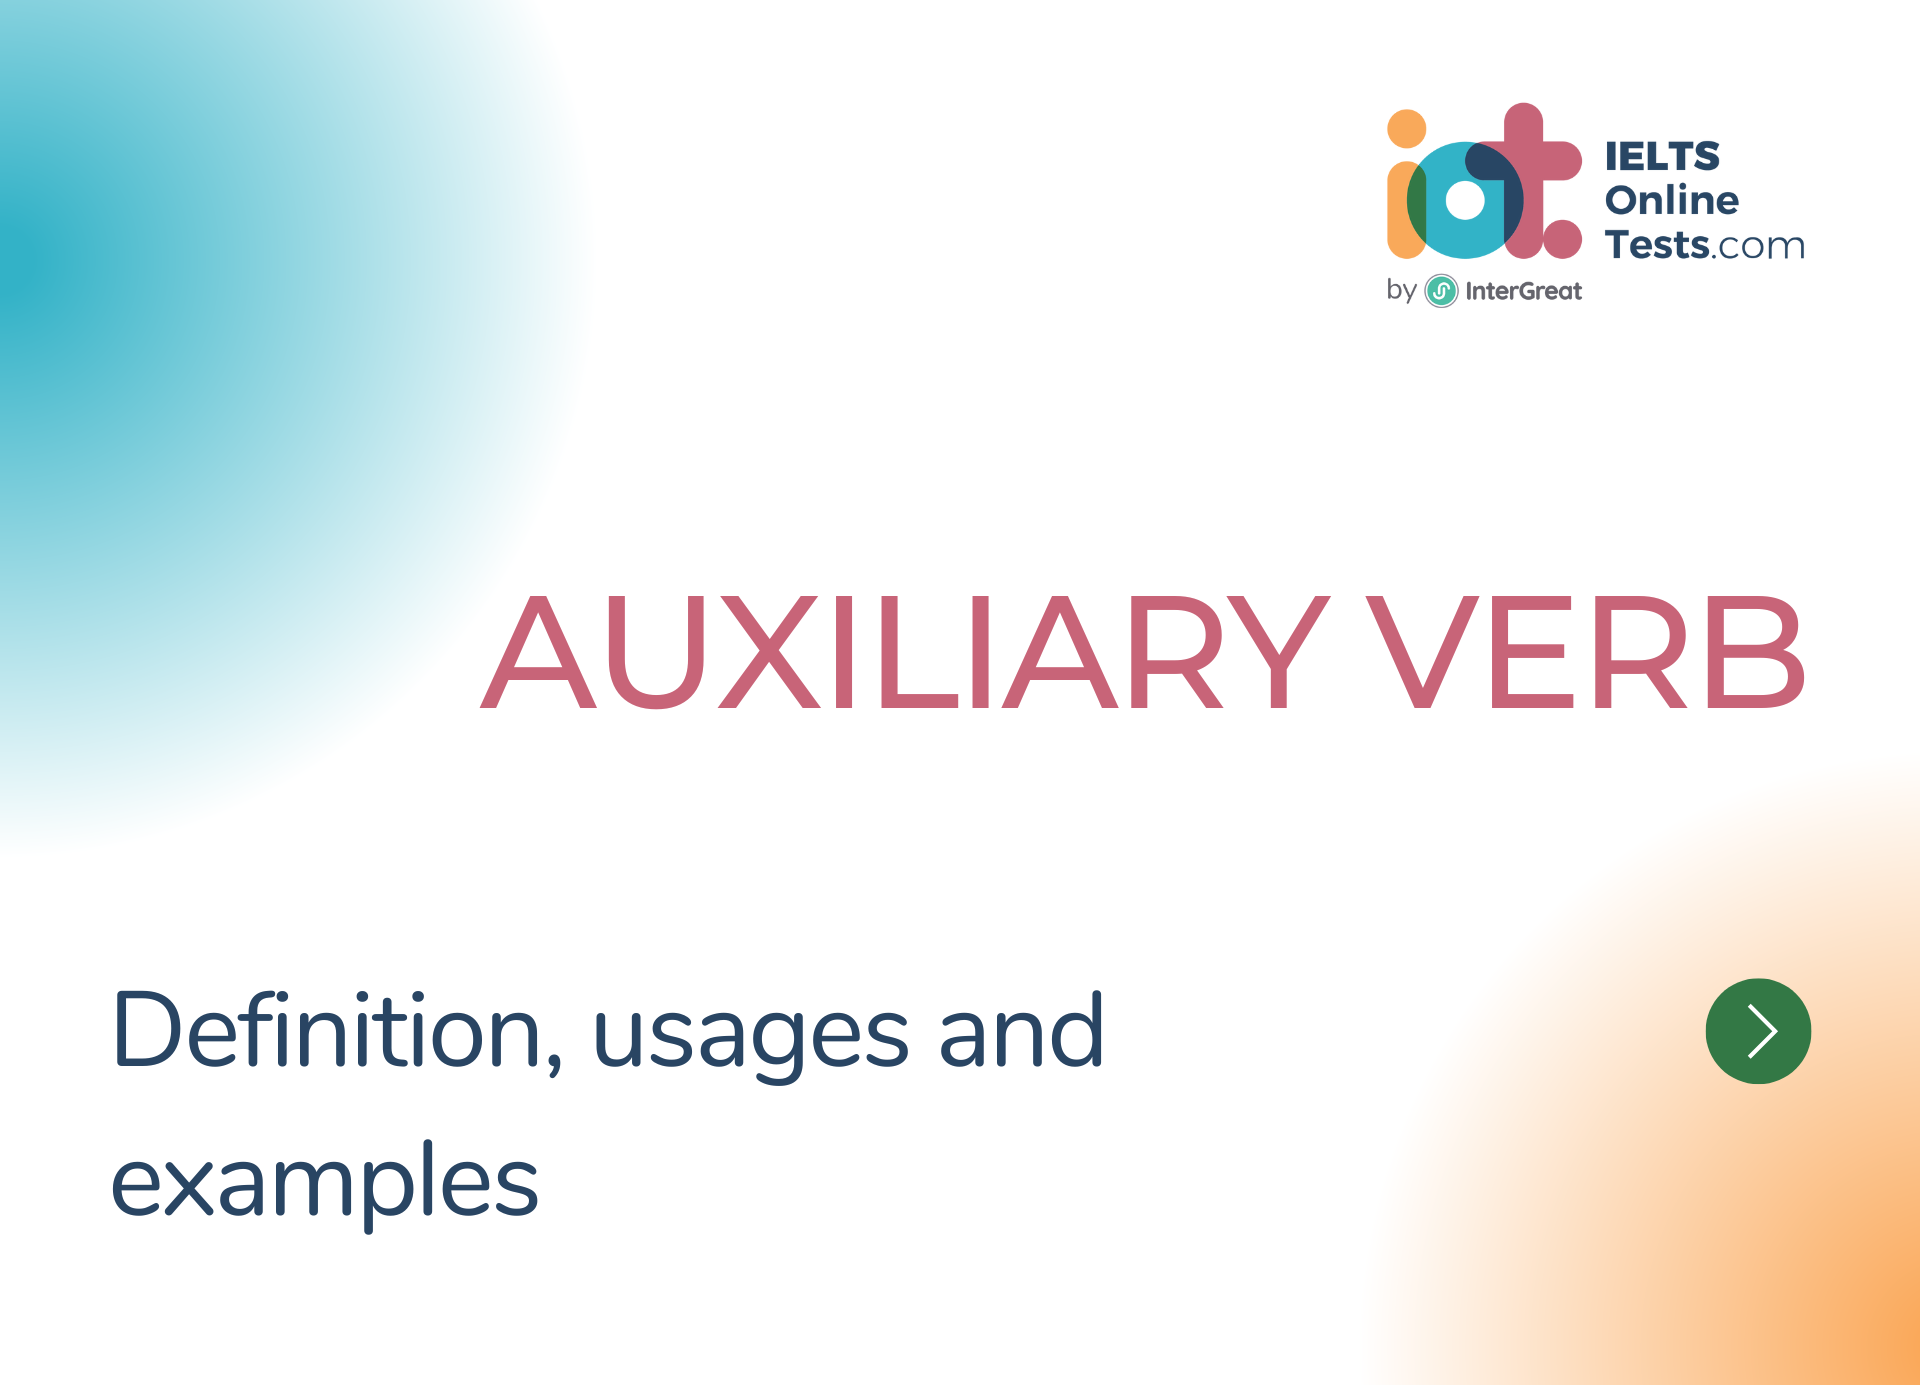 Auxiliary verb definition and examples